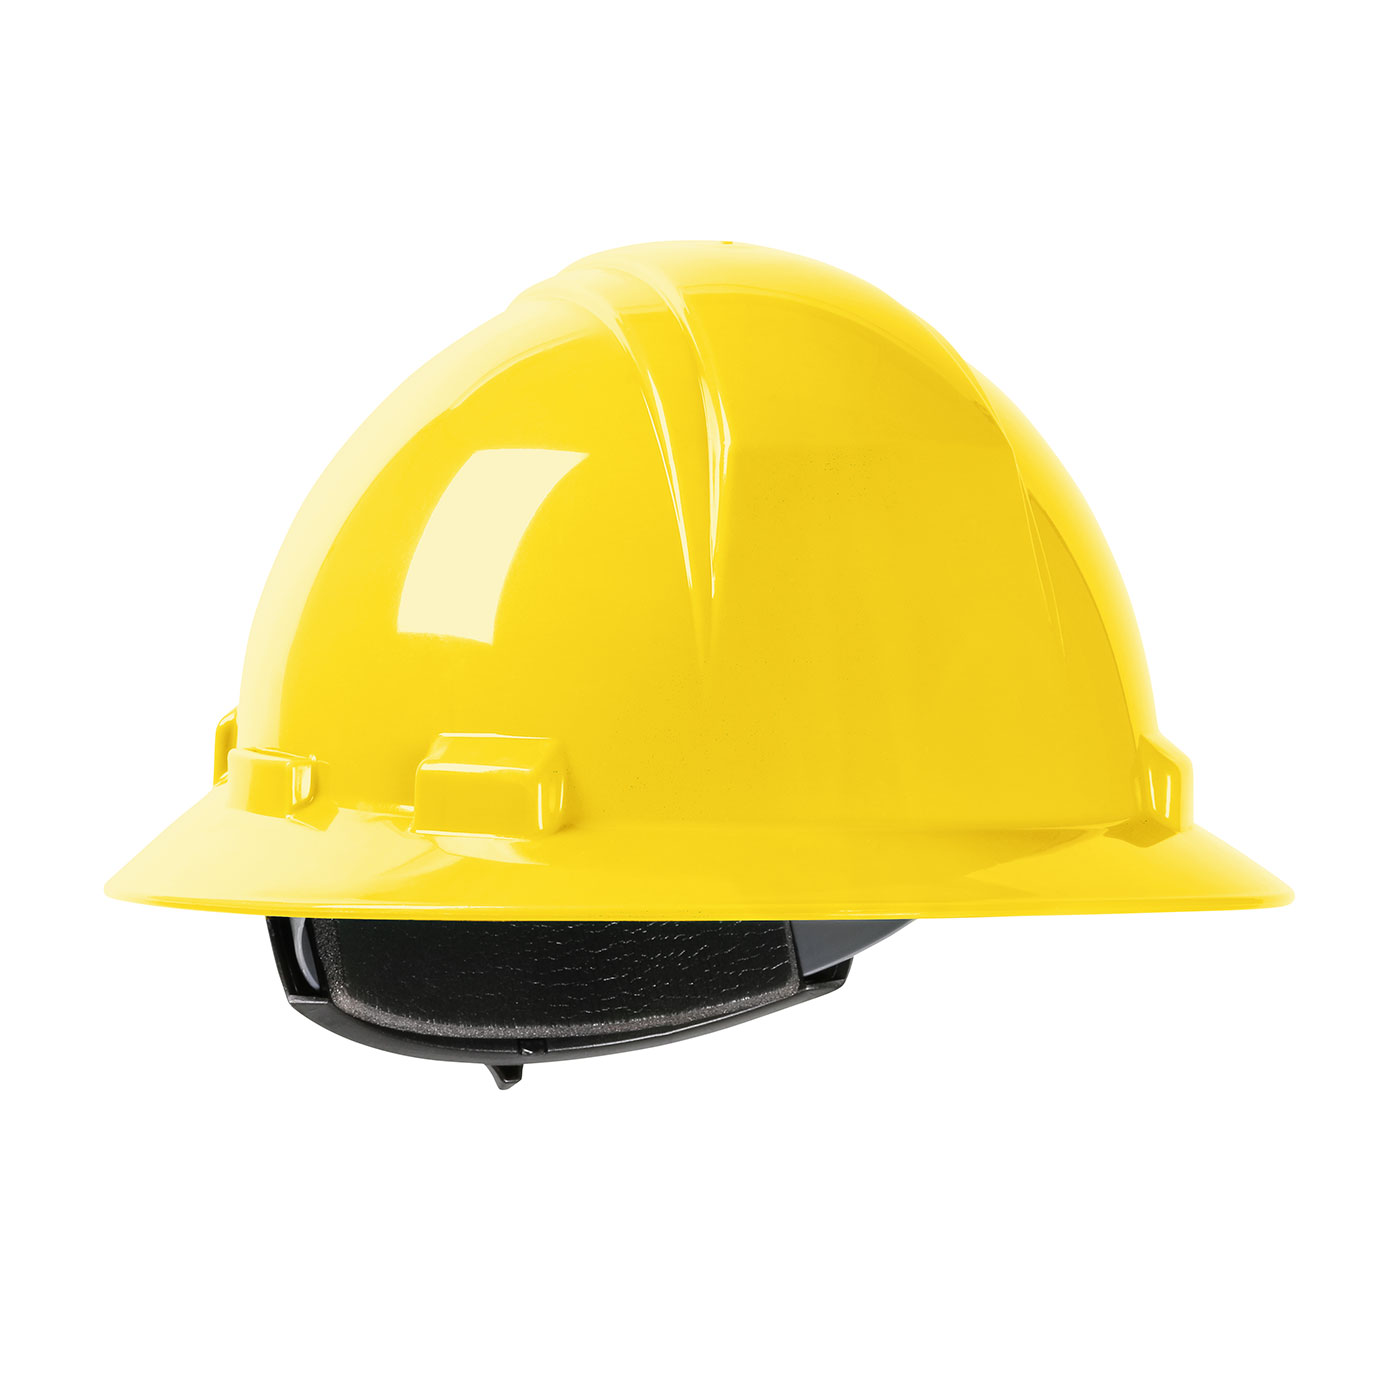 PIP® Dynamic Kilimanjaro™ 280-HP641R-02 Full Brim Hard Hat with HDPE Shell, 4 Point Textile Suspension and Wheel Ratchet Adjustment, Yellow